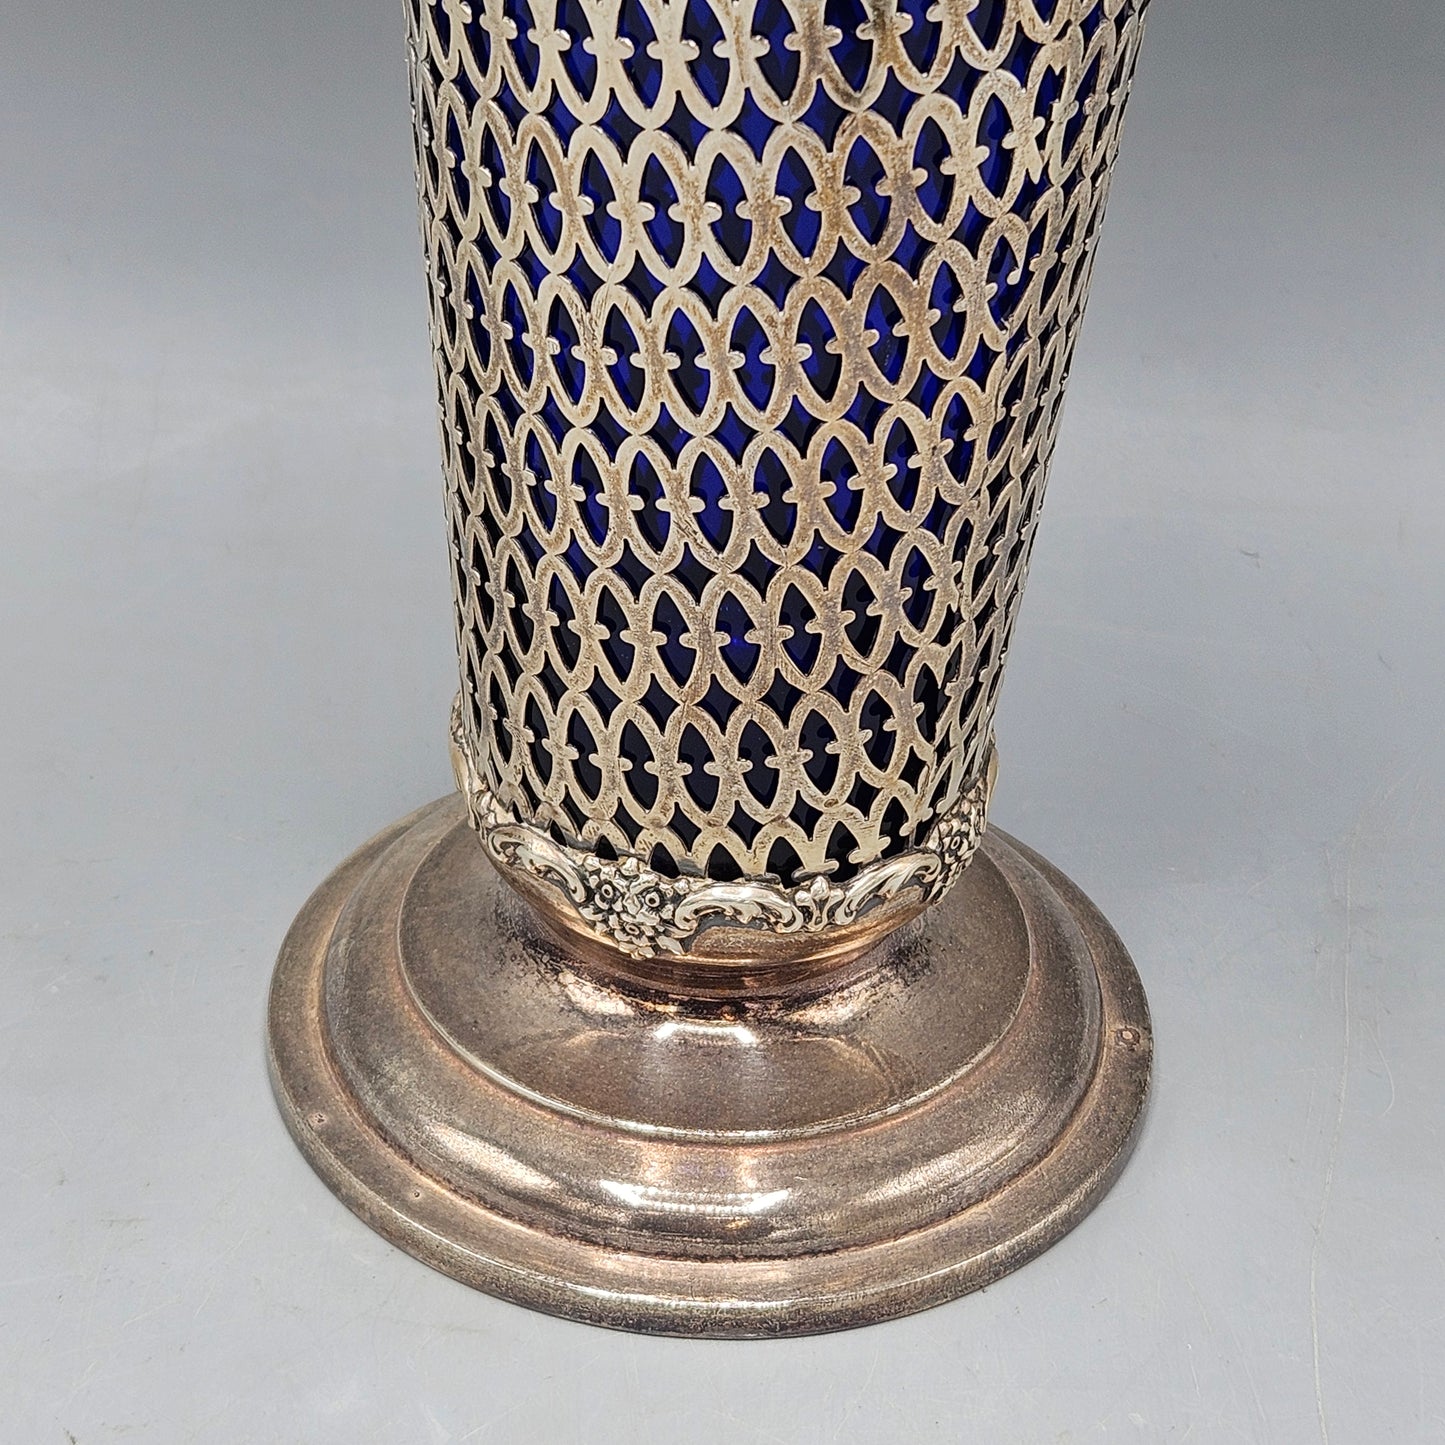 Beautiful Tall Vintage Sterling Silver Pierced Vase with Cobalt Blue Glass Insert